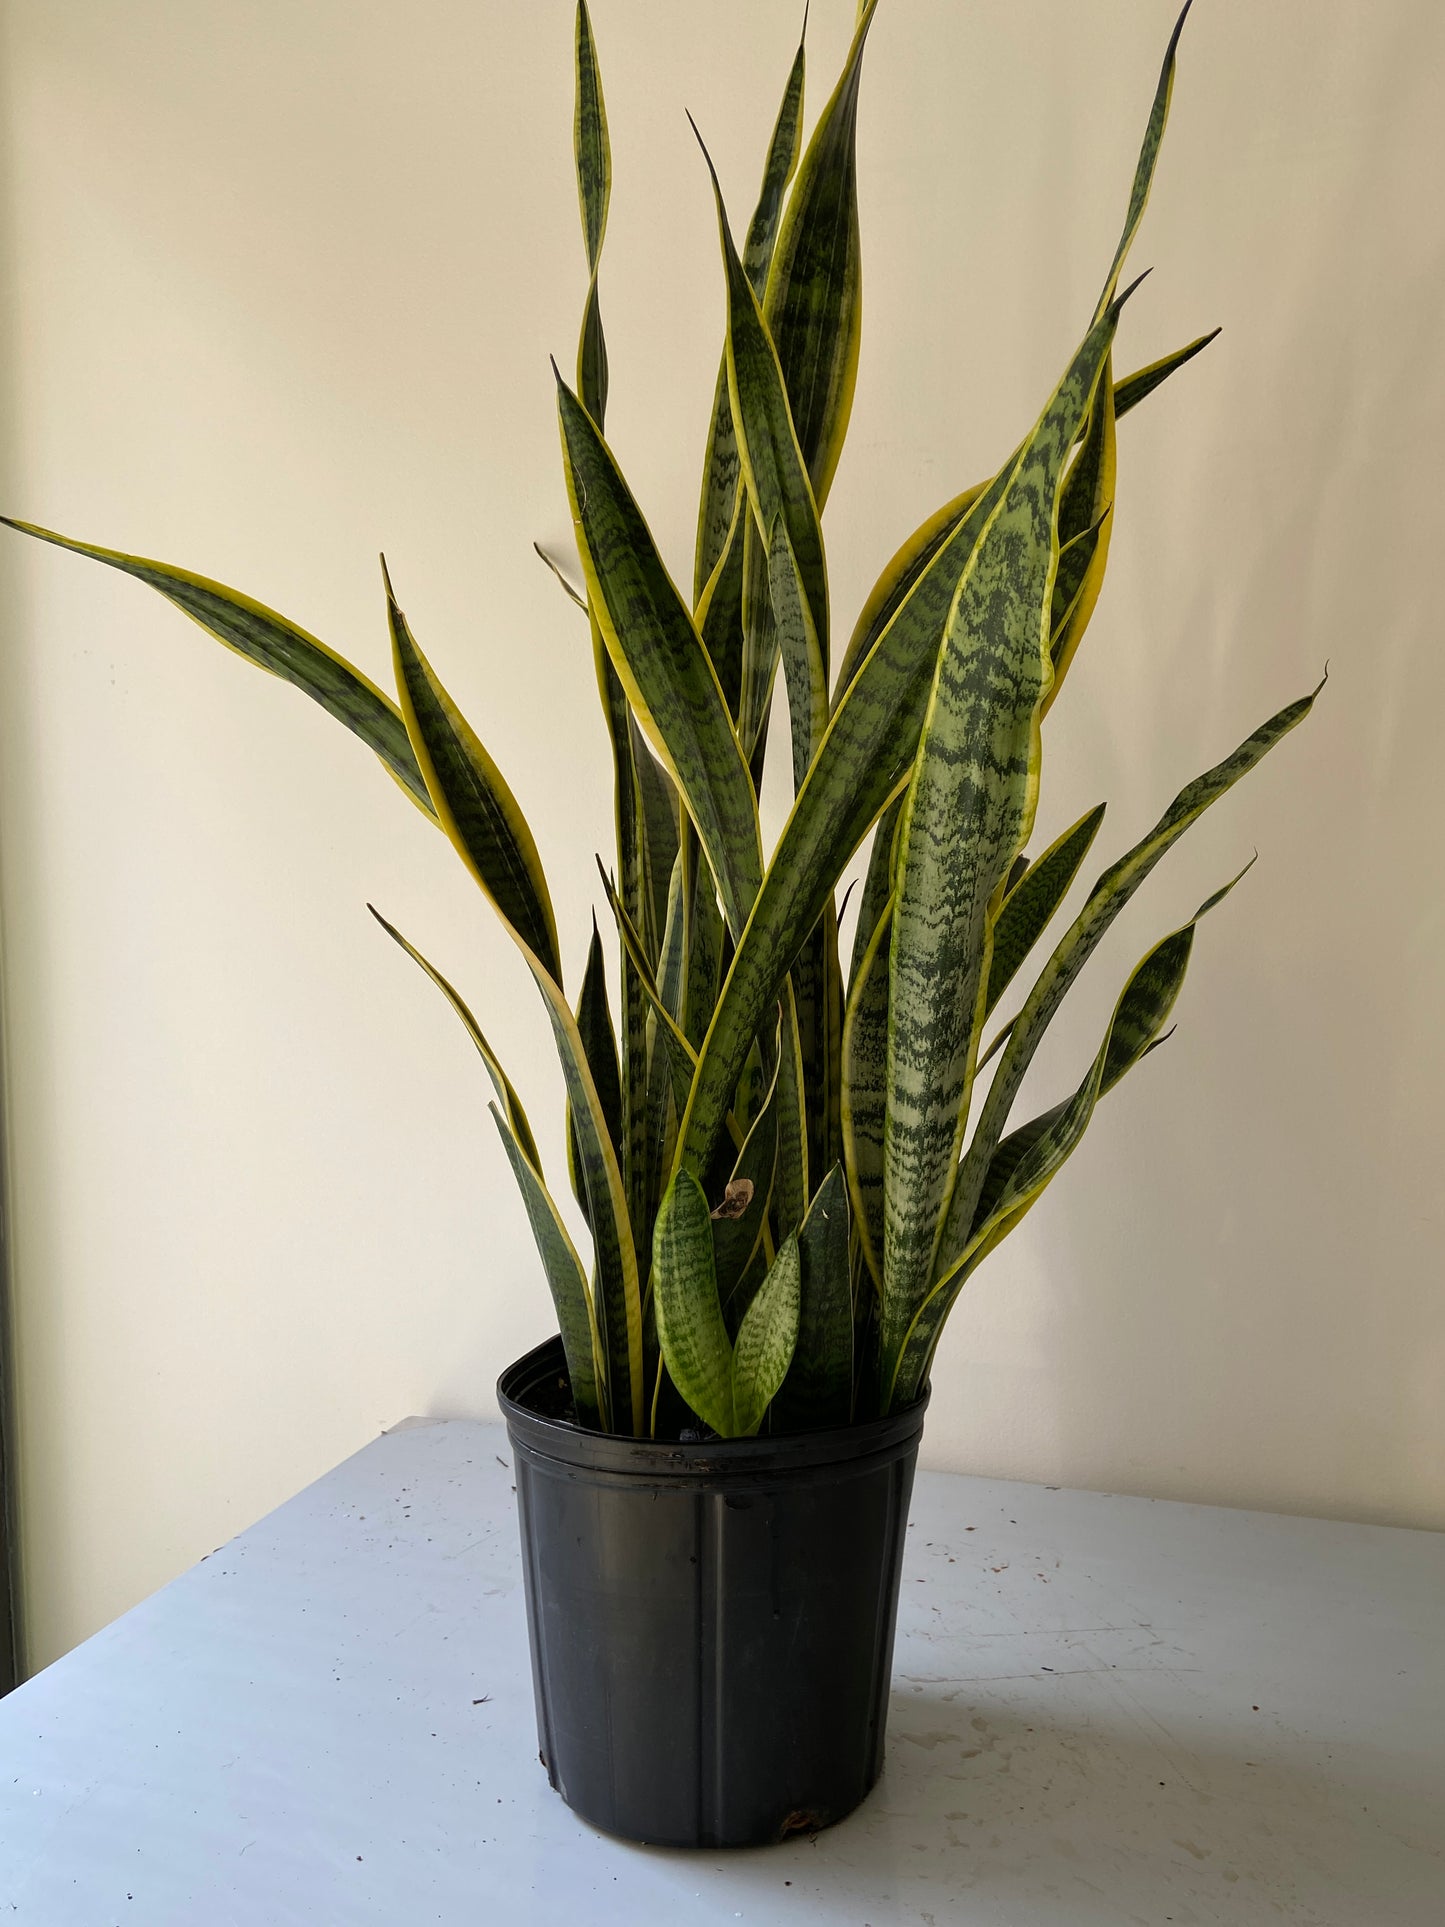 Sansevieria "Snake" Plant - 10" Container